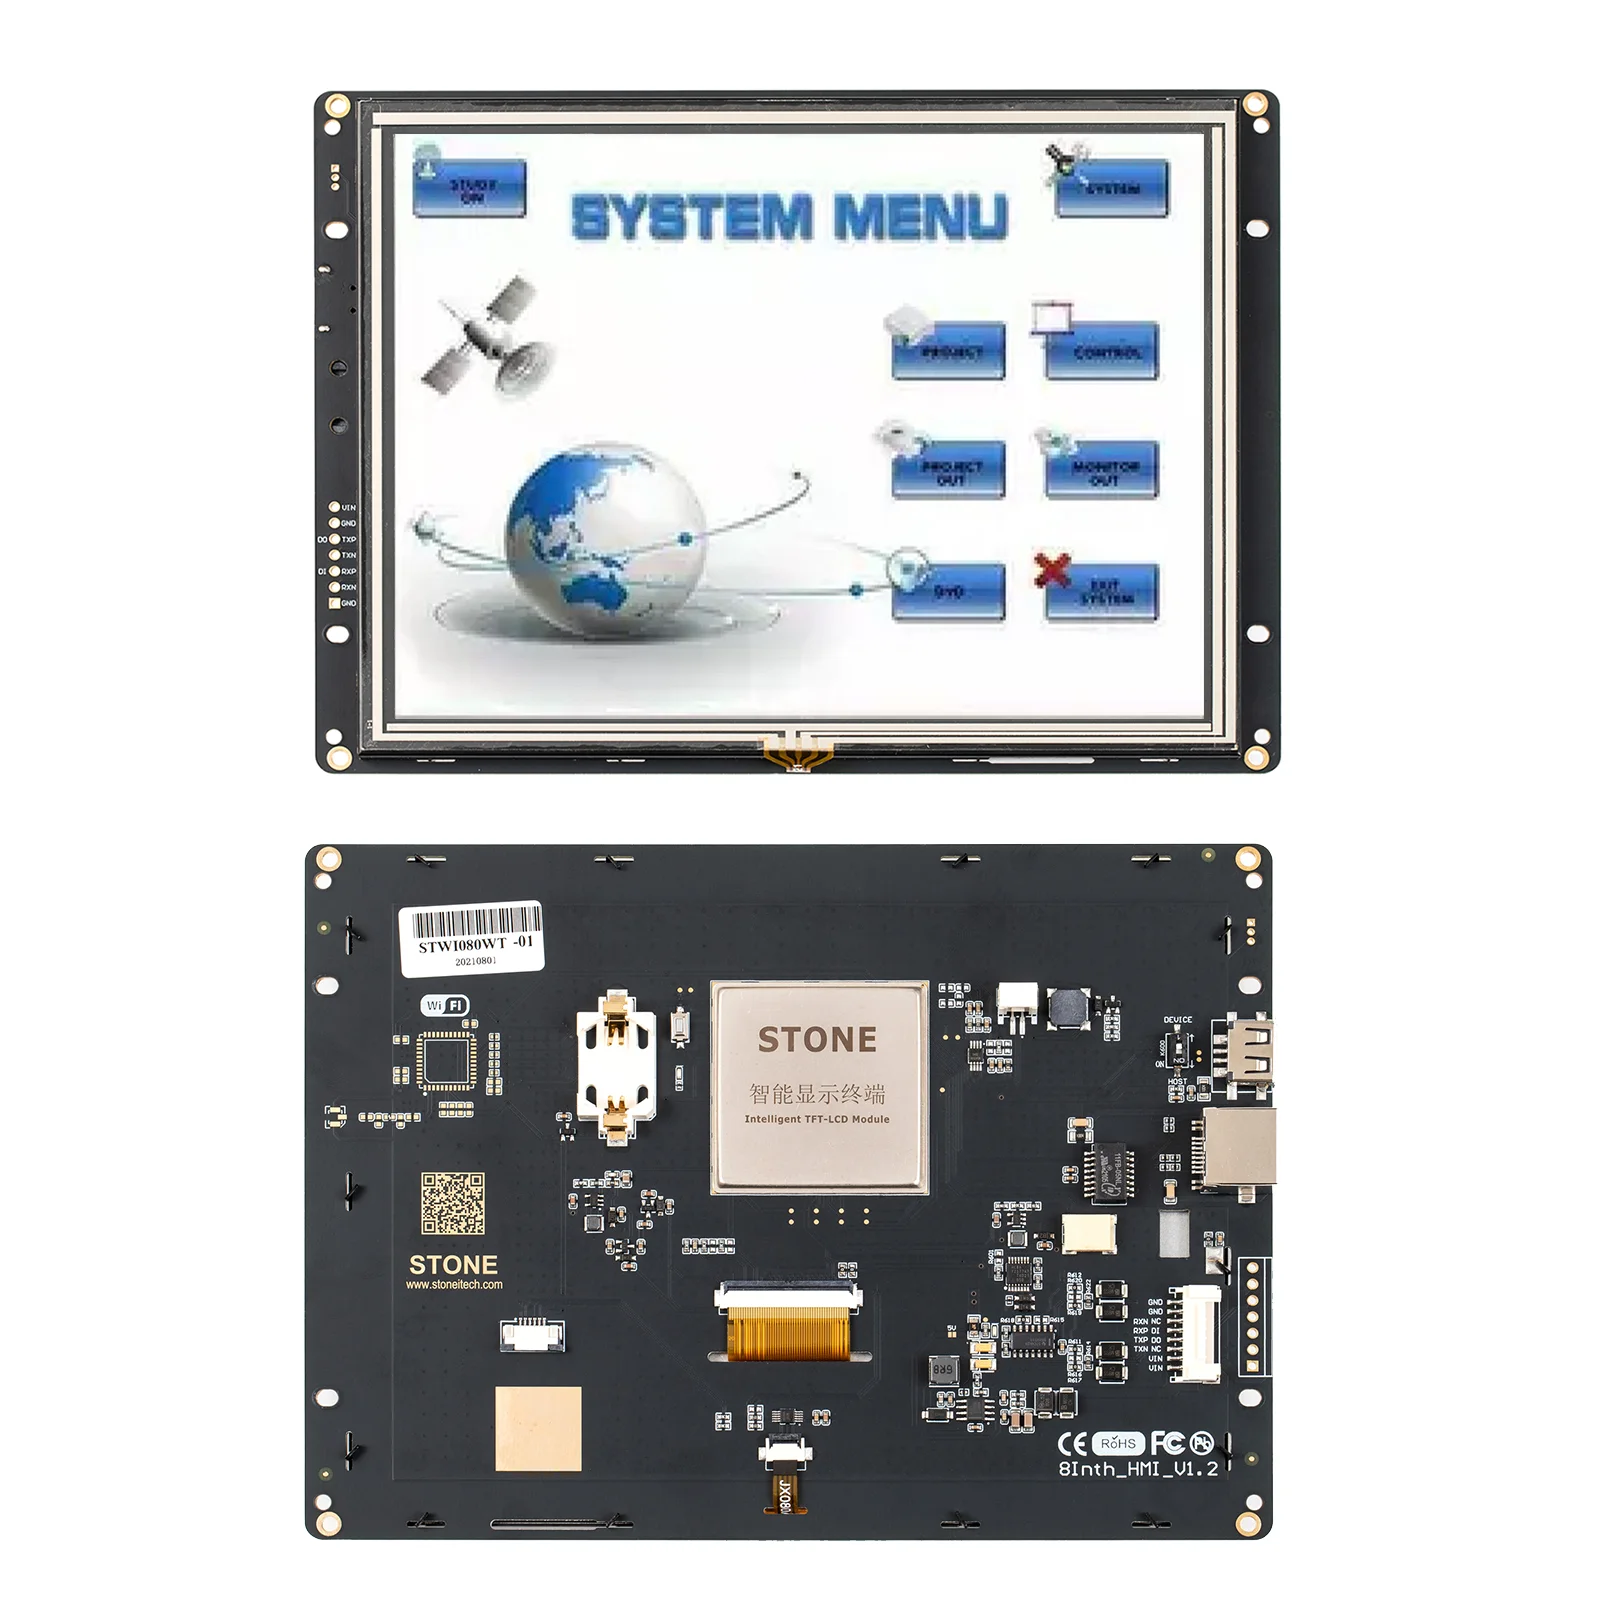 STONE Enhanced Series HMI Graphic LCD Display Module with Touch Panel + Program + UART Port